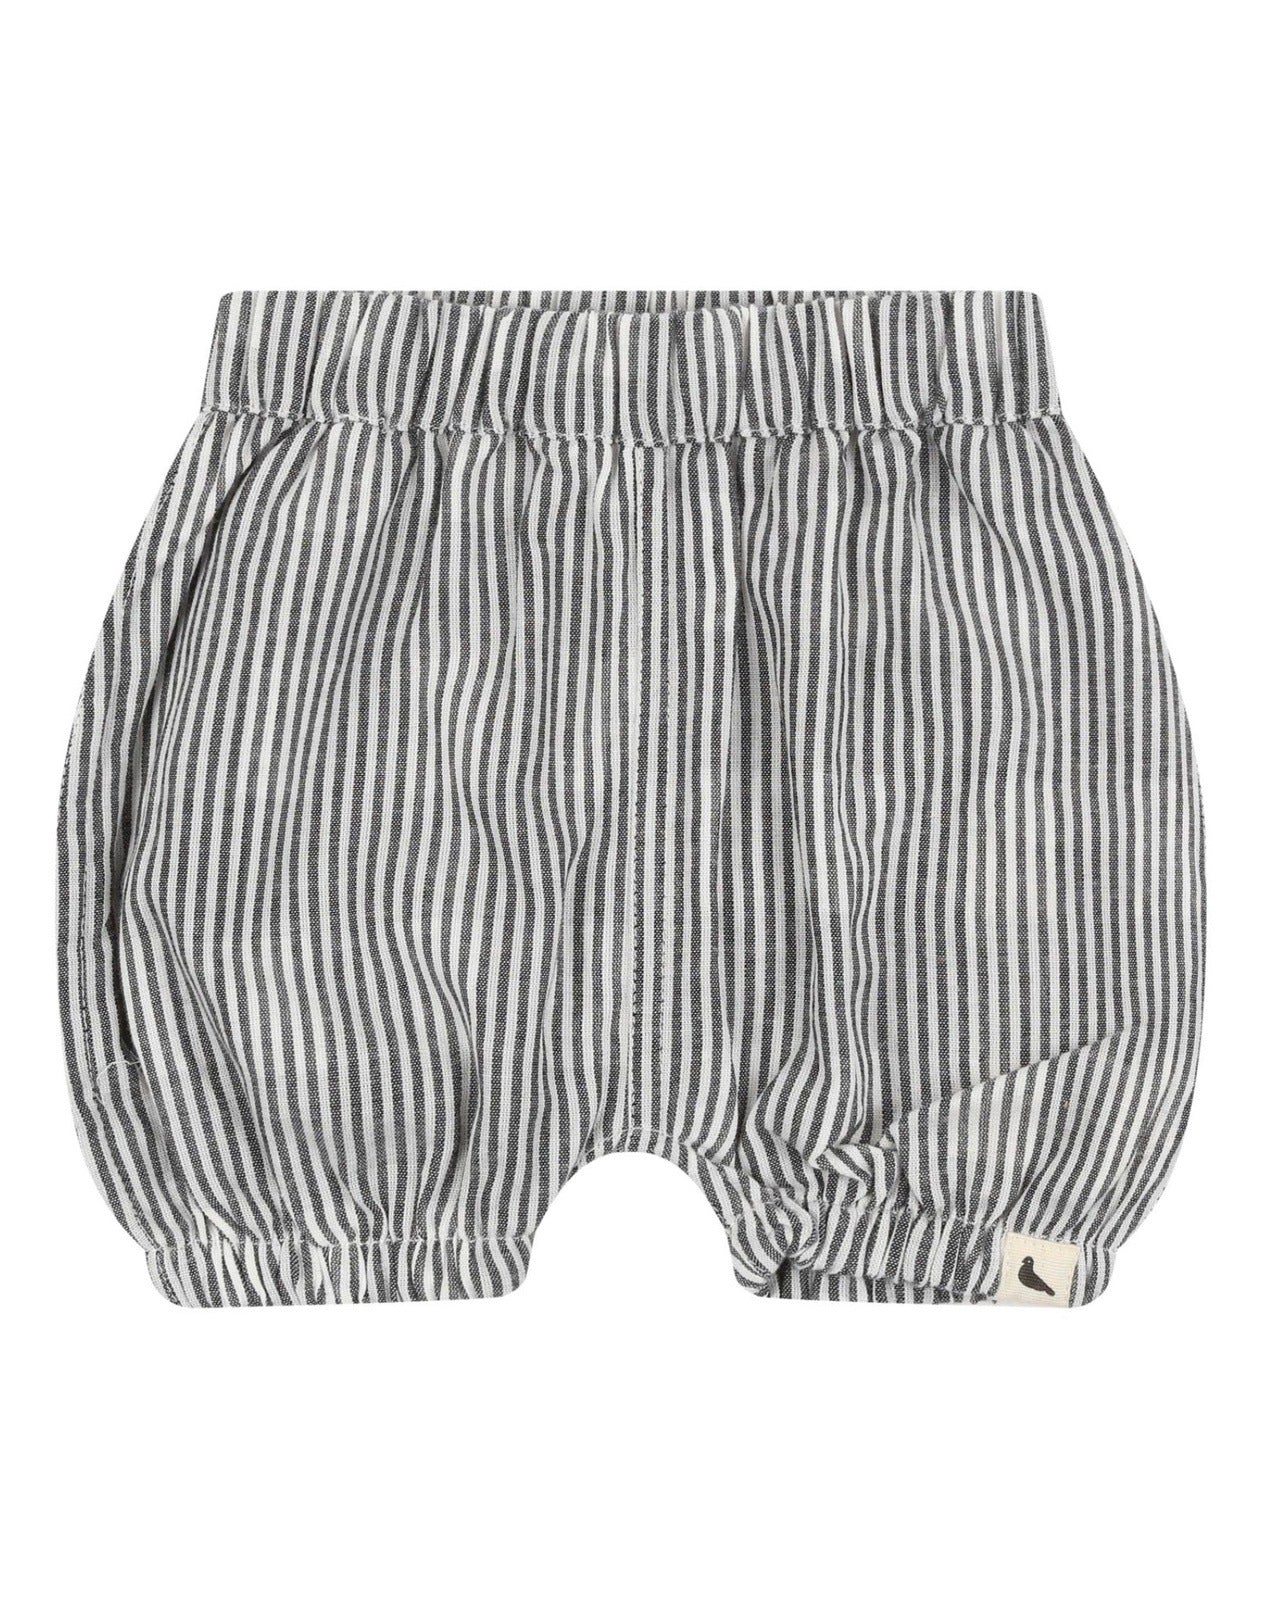 Turtledove Stripe Check Reversible Bloomers, children’s clothing, baby bloomers, baby clothing, children’s summer clothes, summer clothes, independent kids brand Turtledove, Nottinghamshire stockist, sustainable children’s clothing 